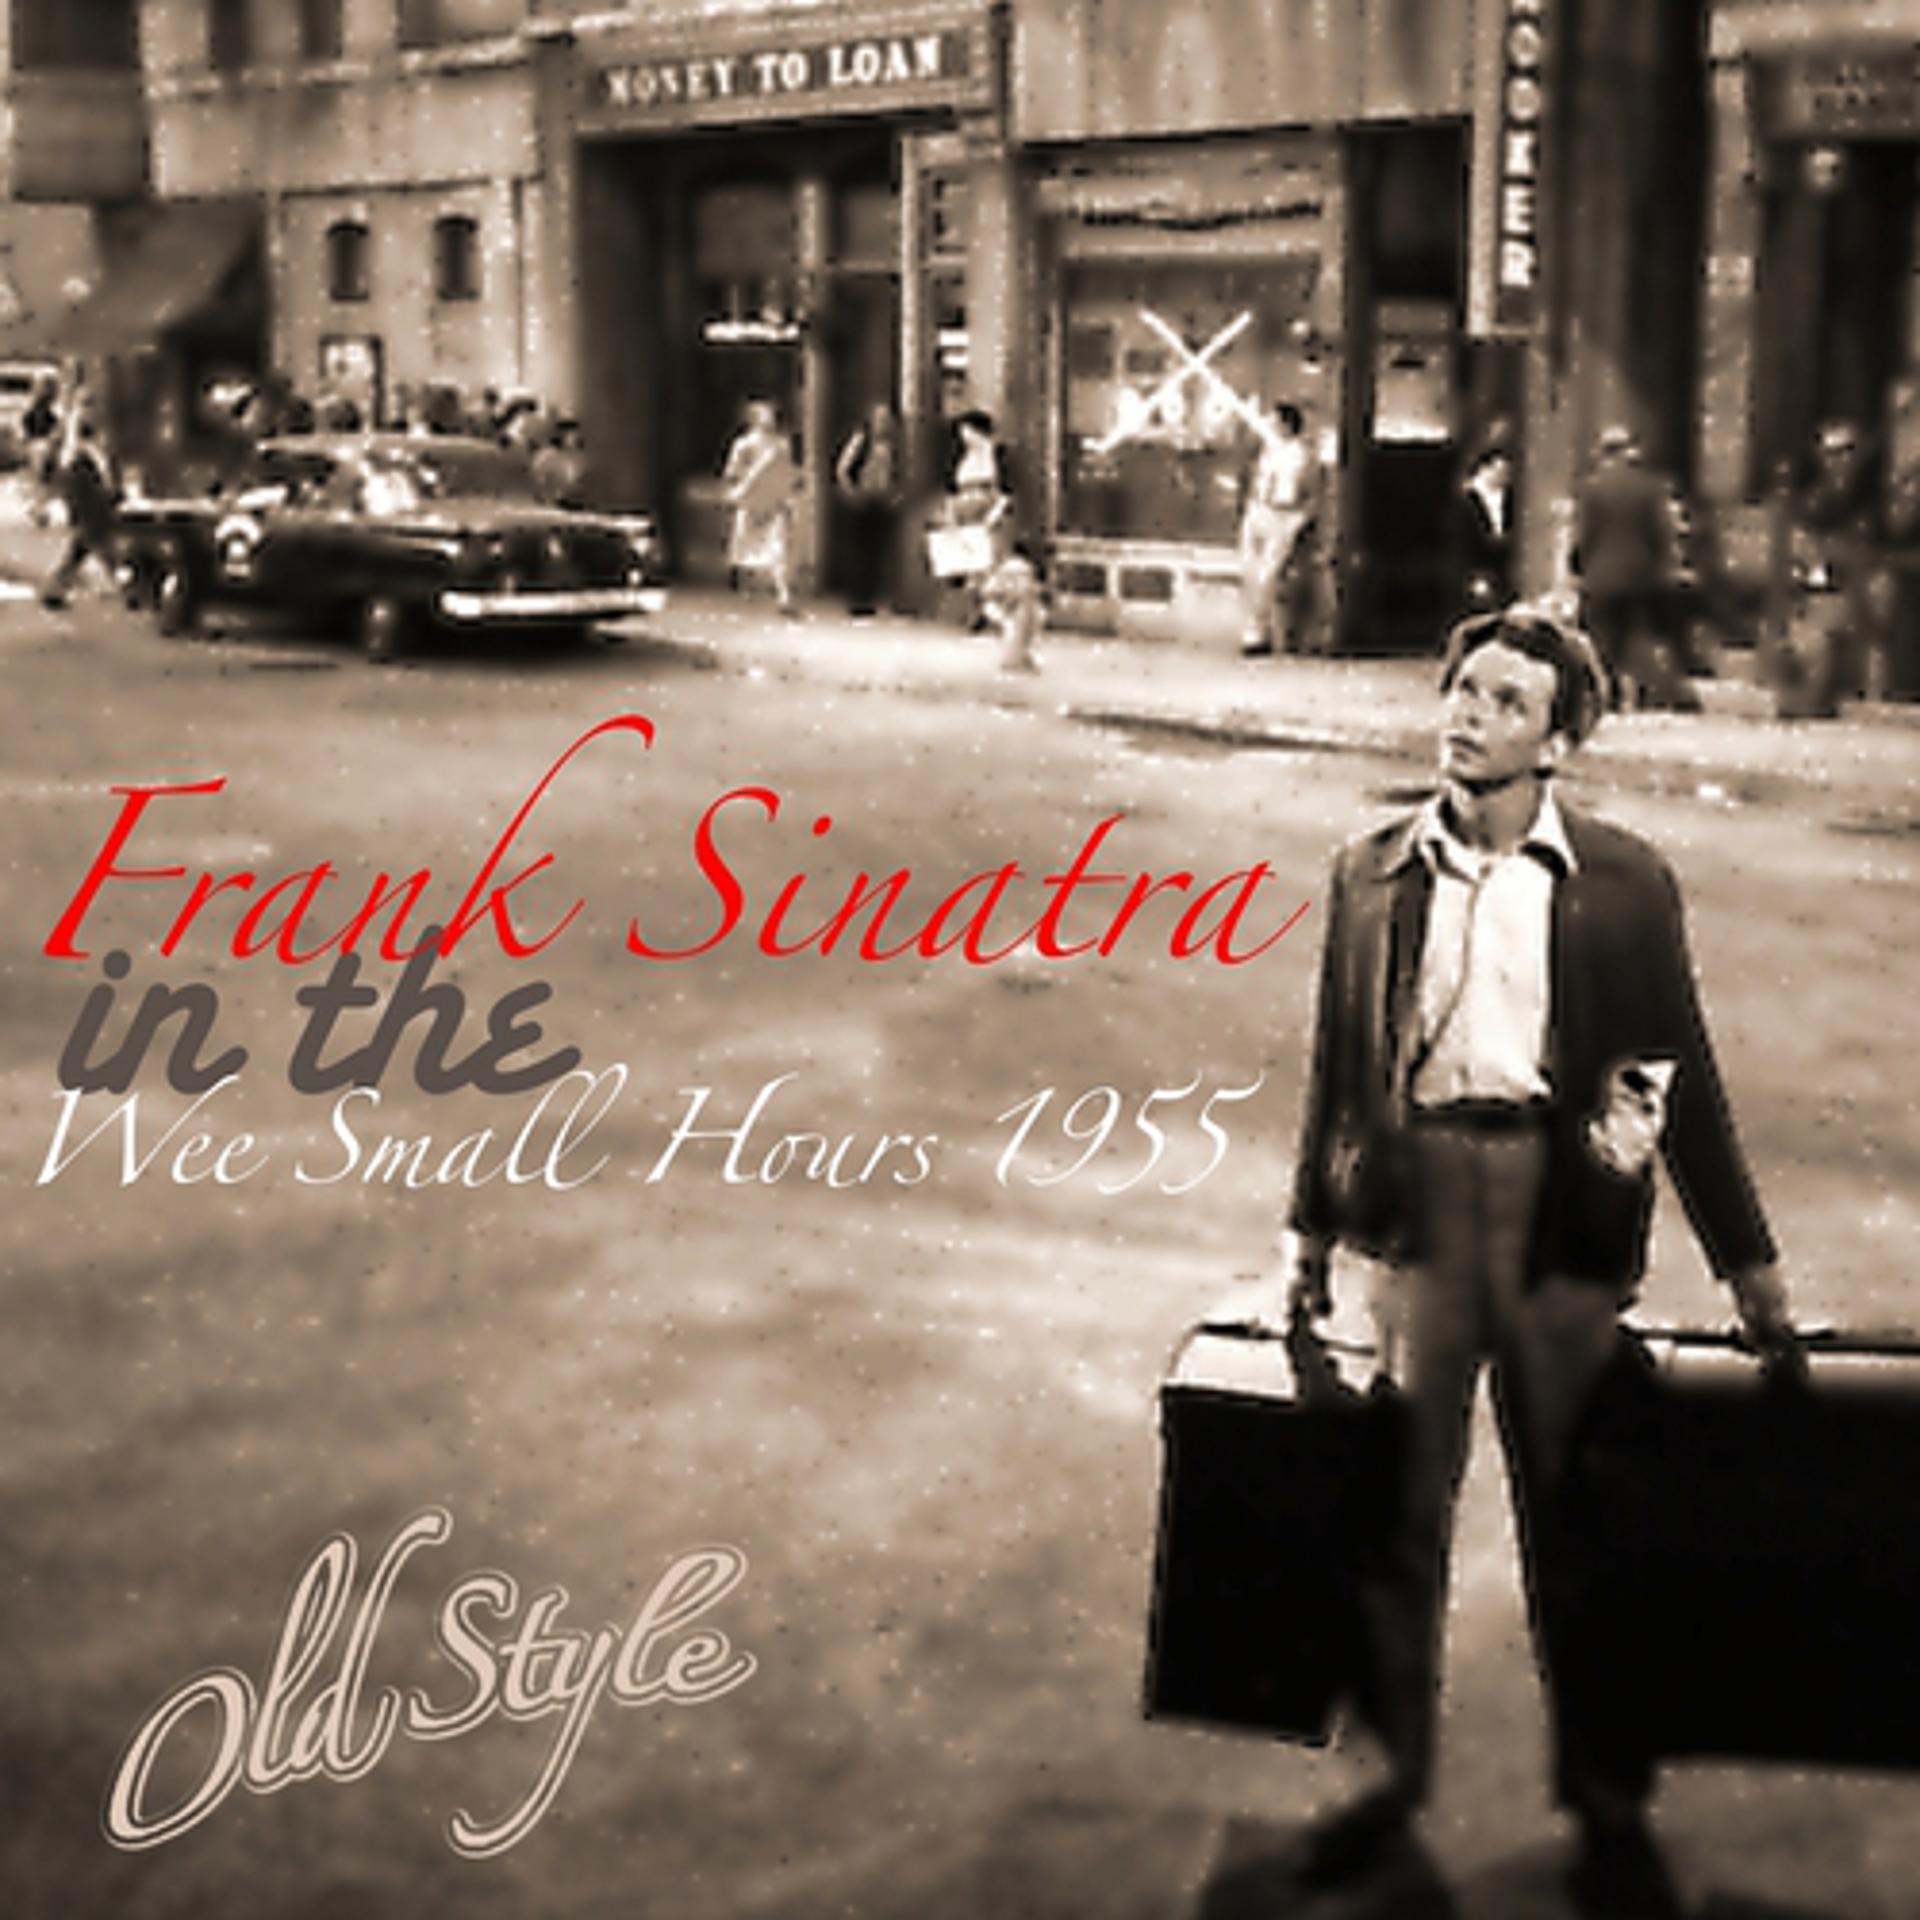 Small hours. Frank Sinatra - in the Wee small hours (1955). Frank Sinatra - Sinatra: best of the best (2011). Frank Sinatra - Watertown. Frank Sinatra - it never entered my Mind.